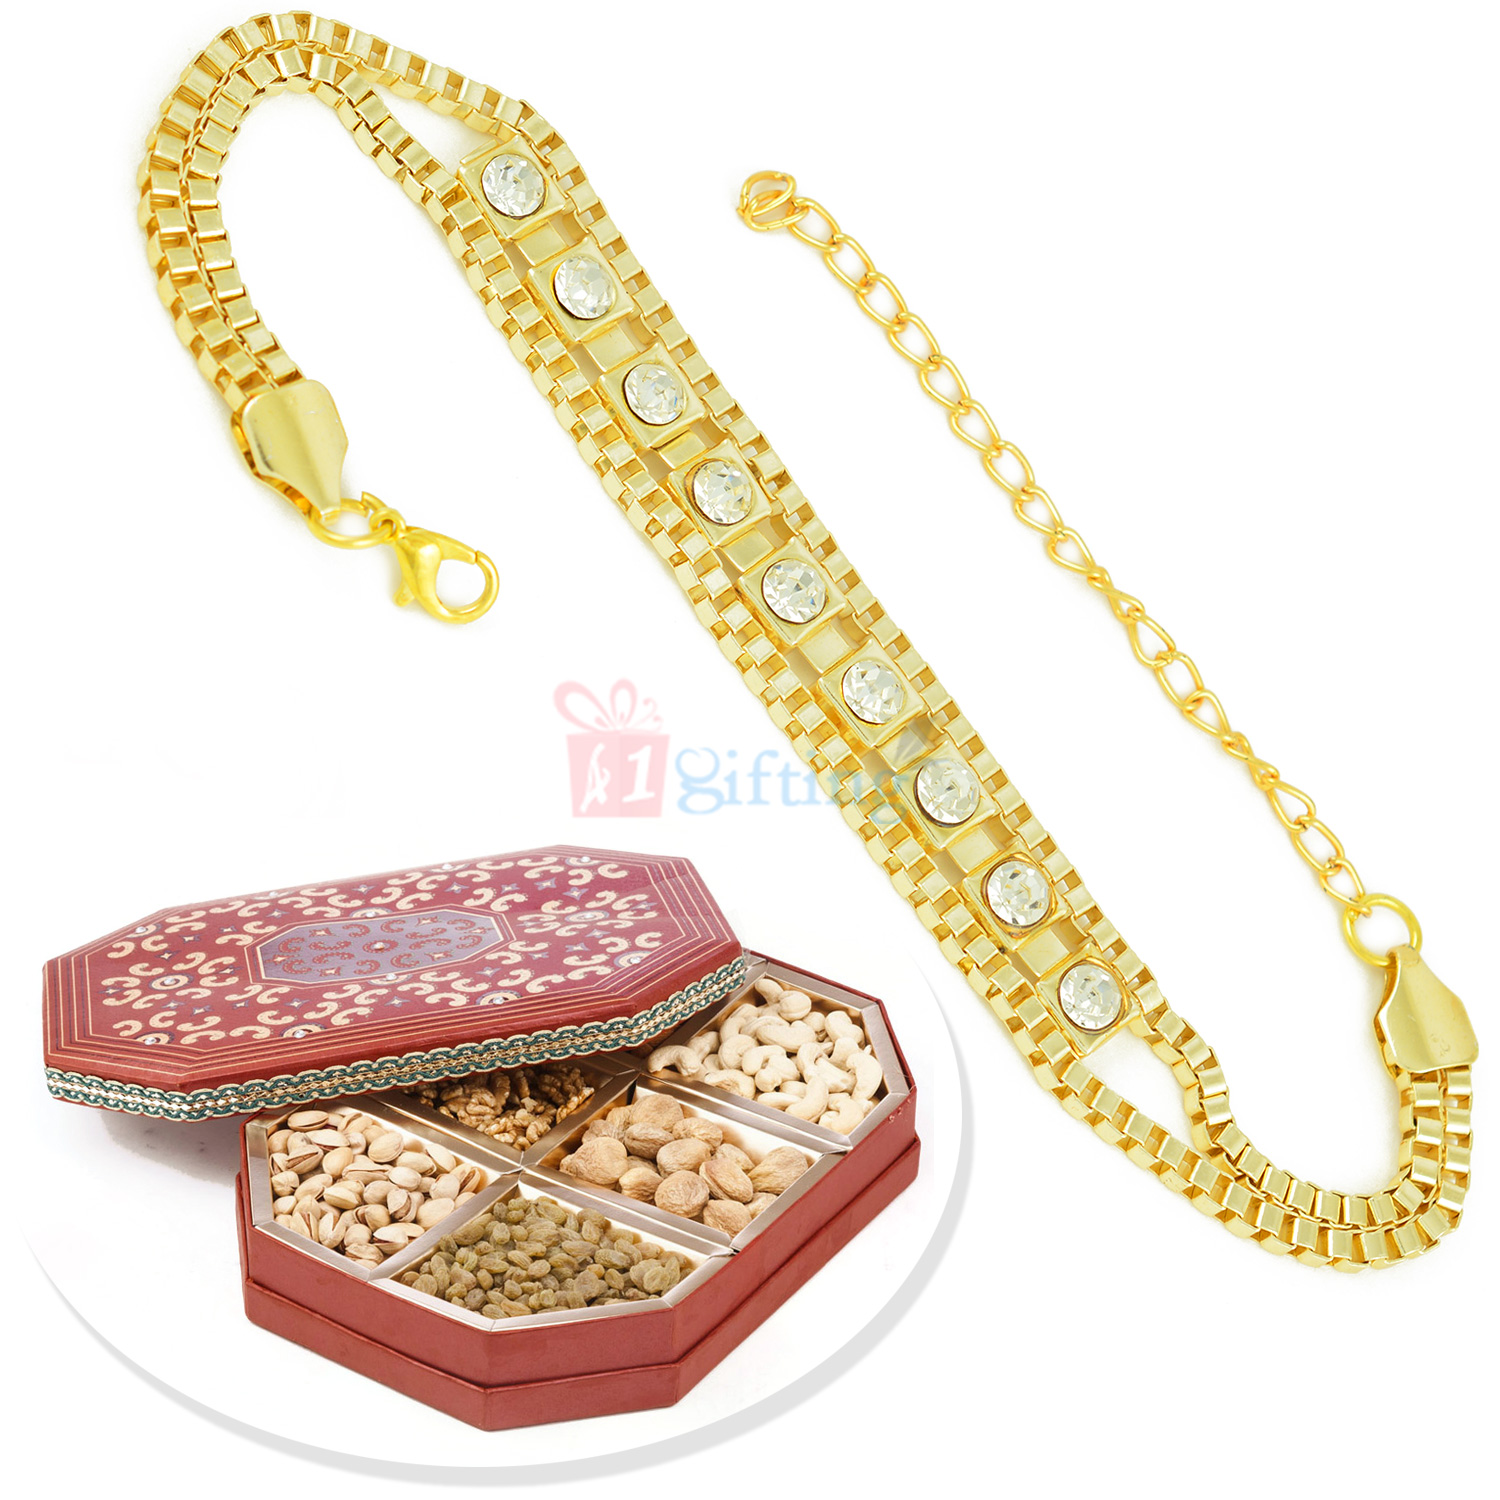 Jewel Golden Awesome Bracelet with 6 Types Dryfruits Nuts